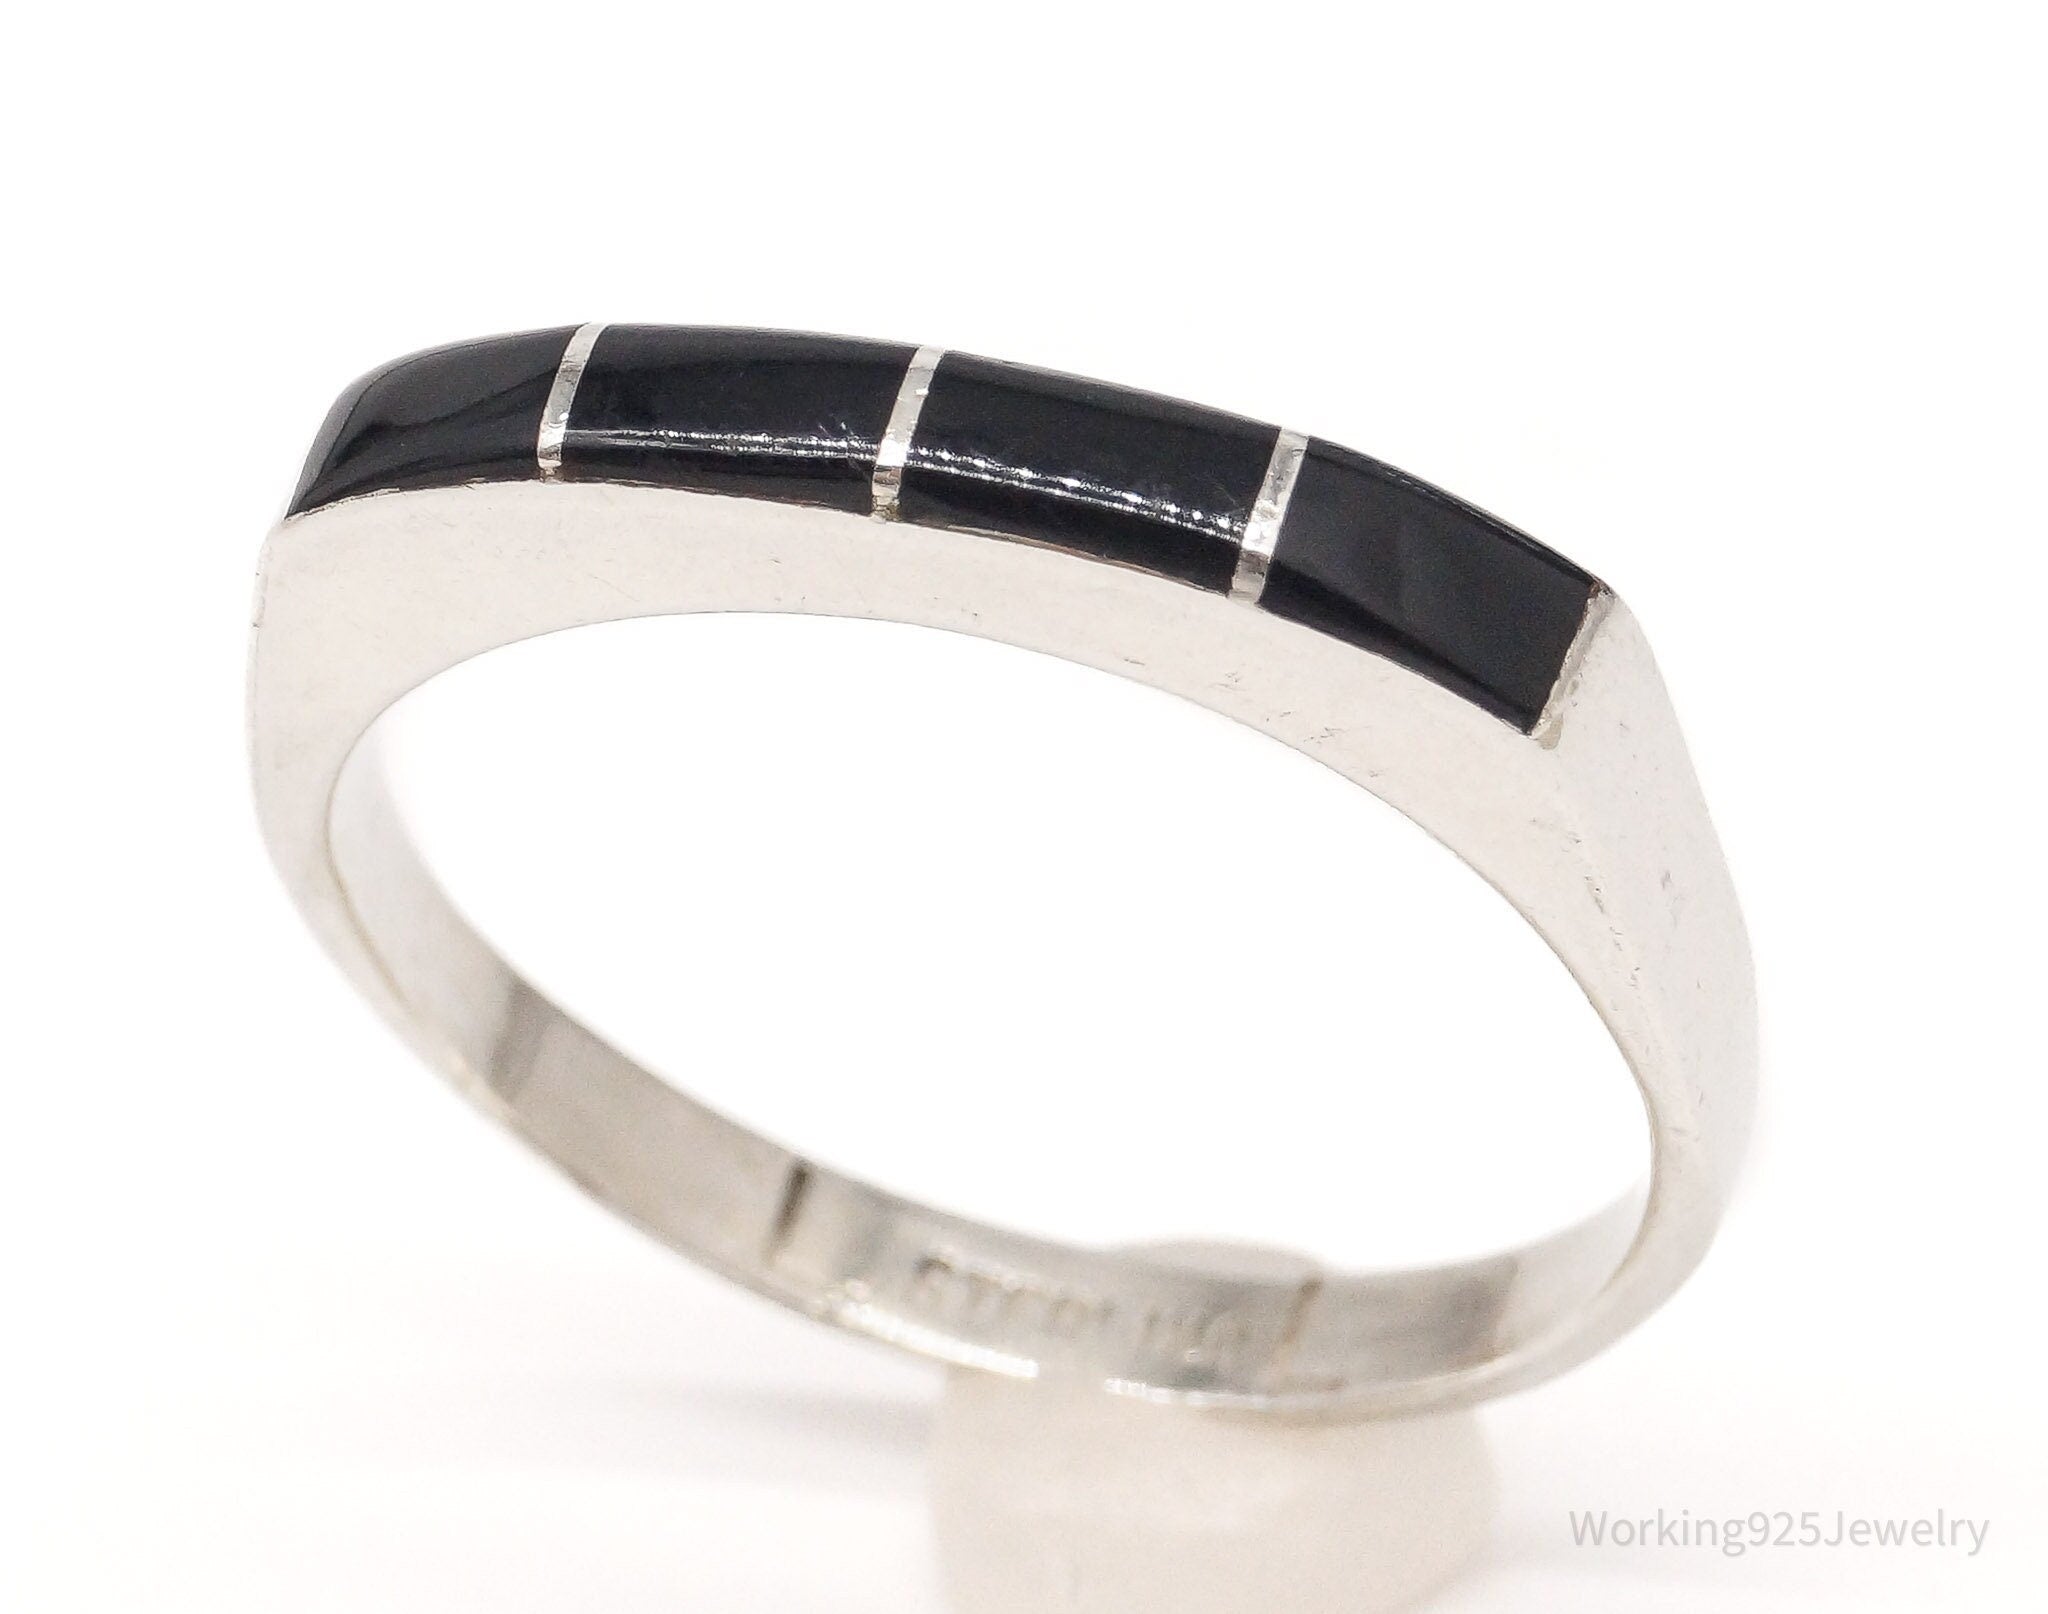 Vintage Native American Black Onyx Inlay Sterling Silver Ring - Size 9